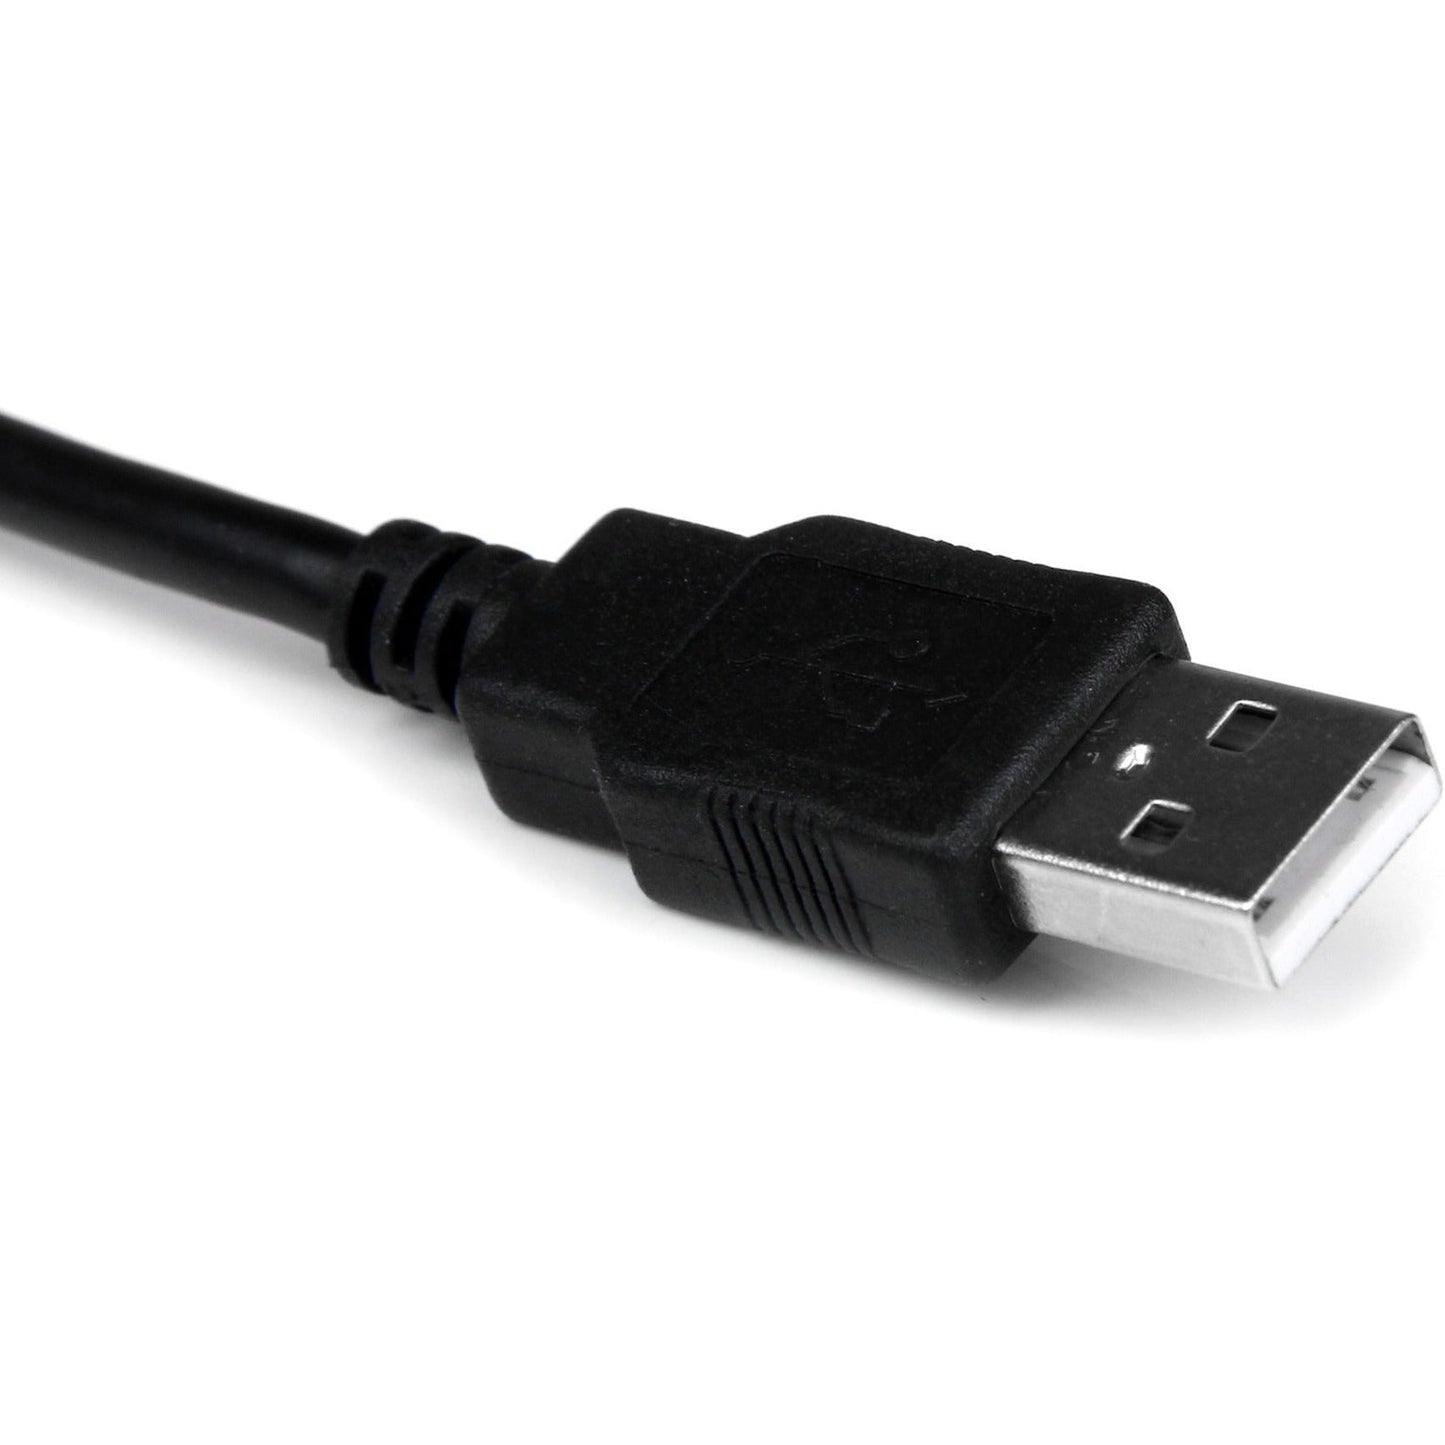 StarTech.com USB to Serial Adapter - Prolific PL-2303 - COM Port Retention - USB to RS232 Adapter Cable - USB Serial